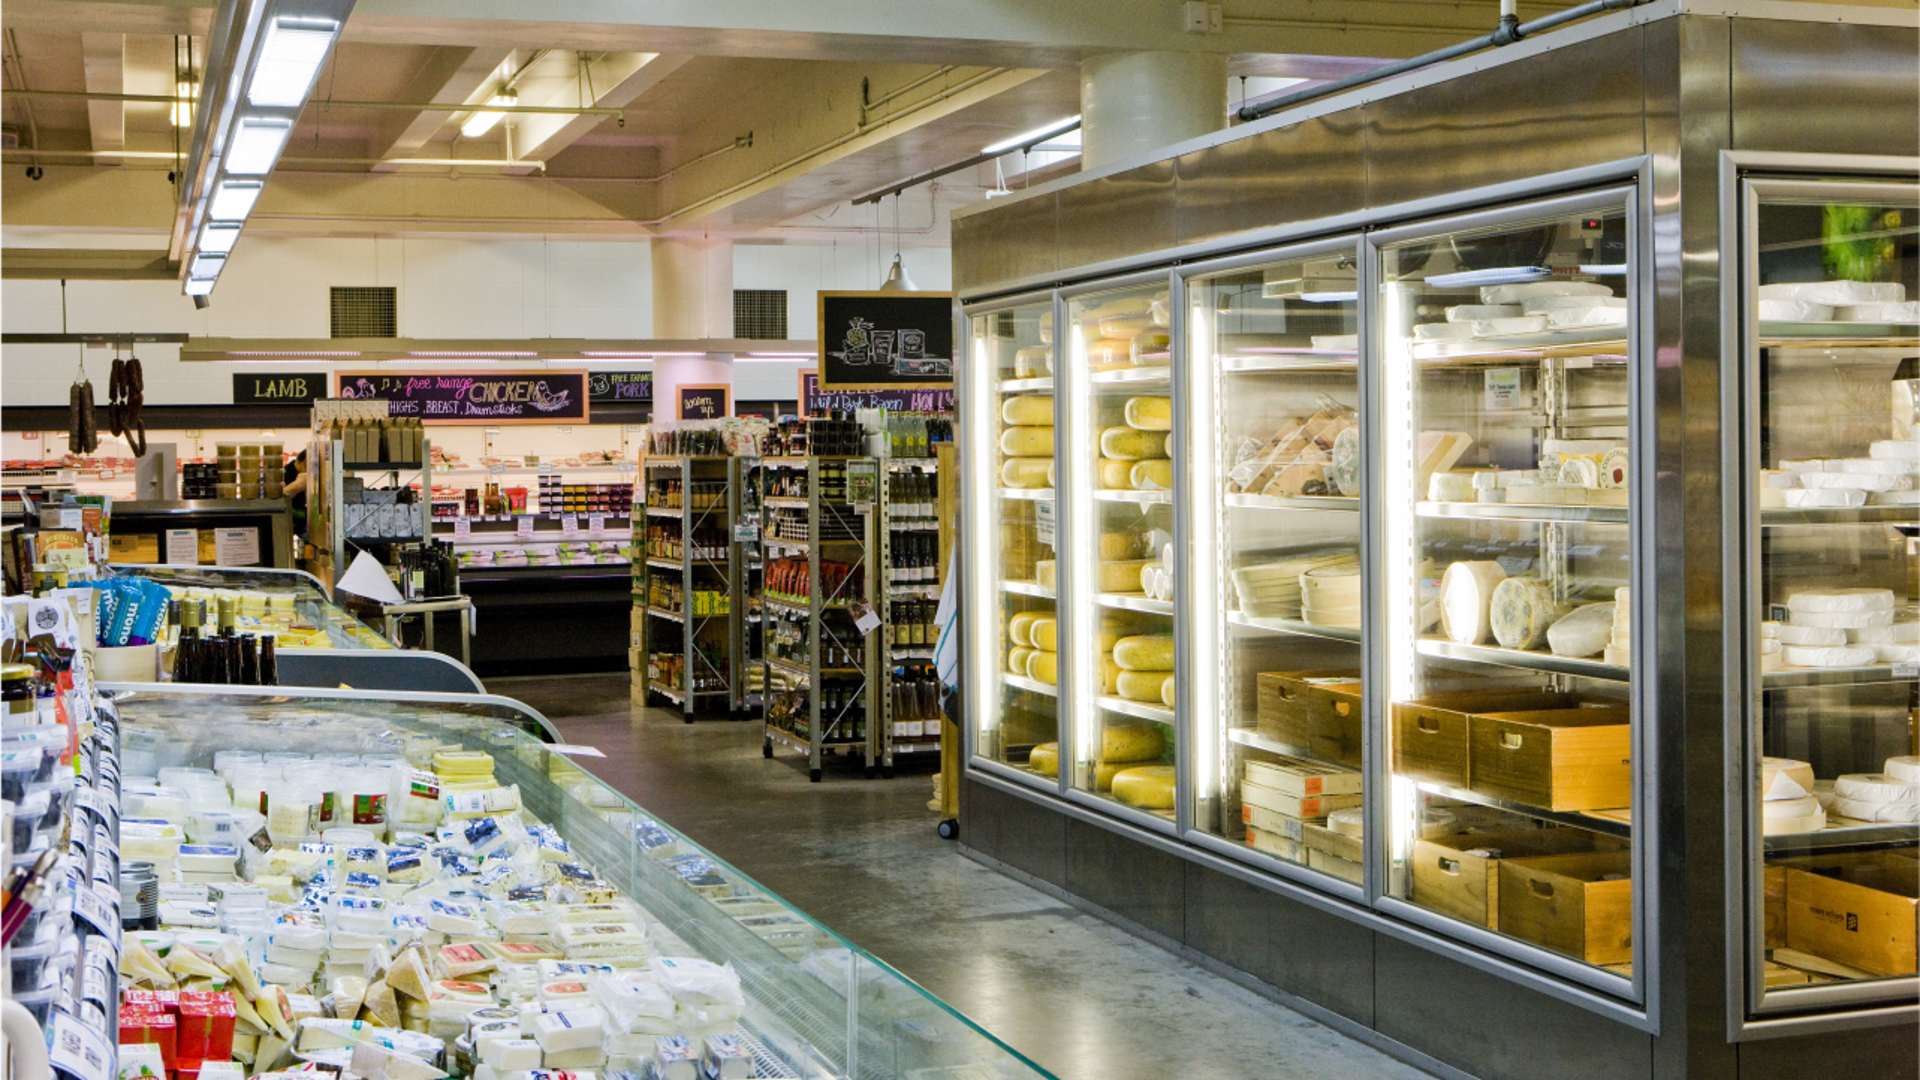 New Zealand's Top Cheese Stores for 2022 Have Just Been Crowned